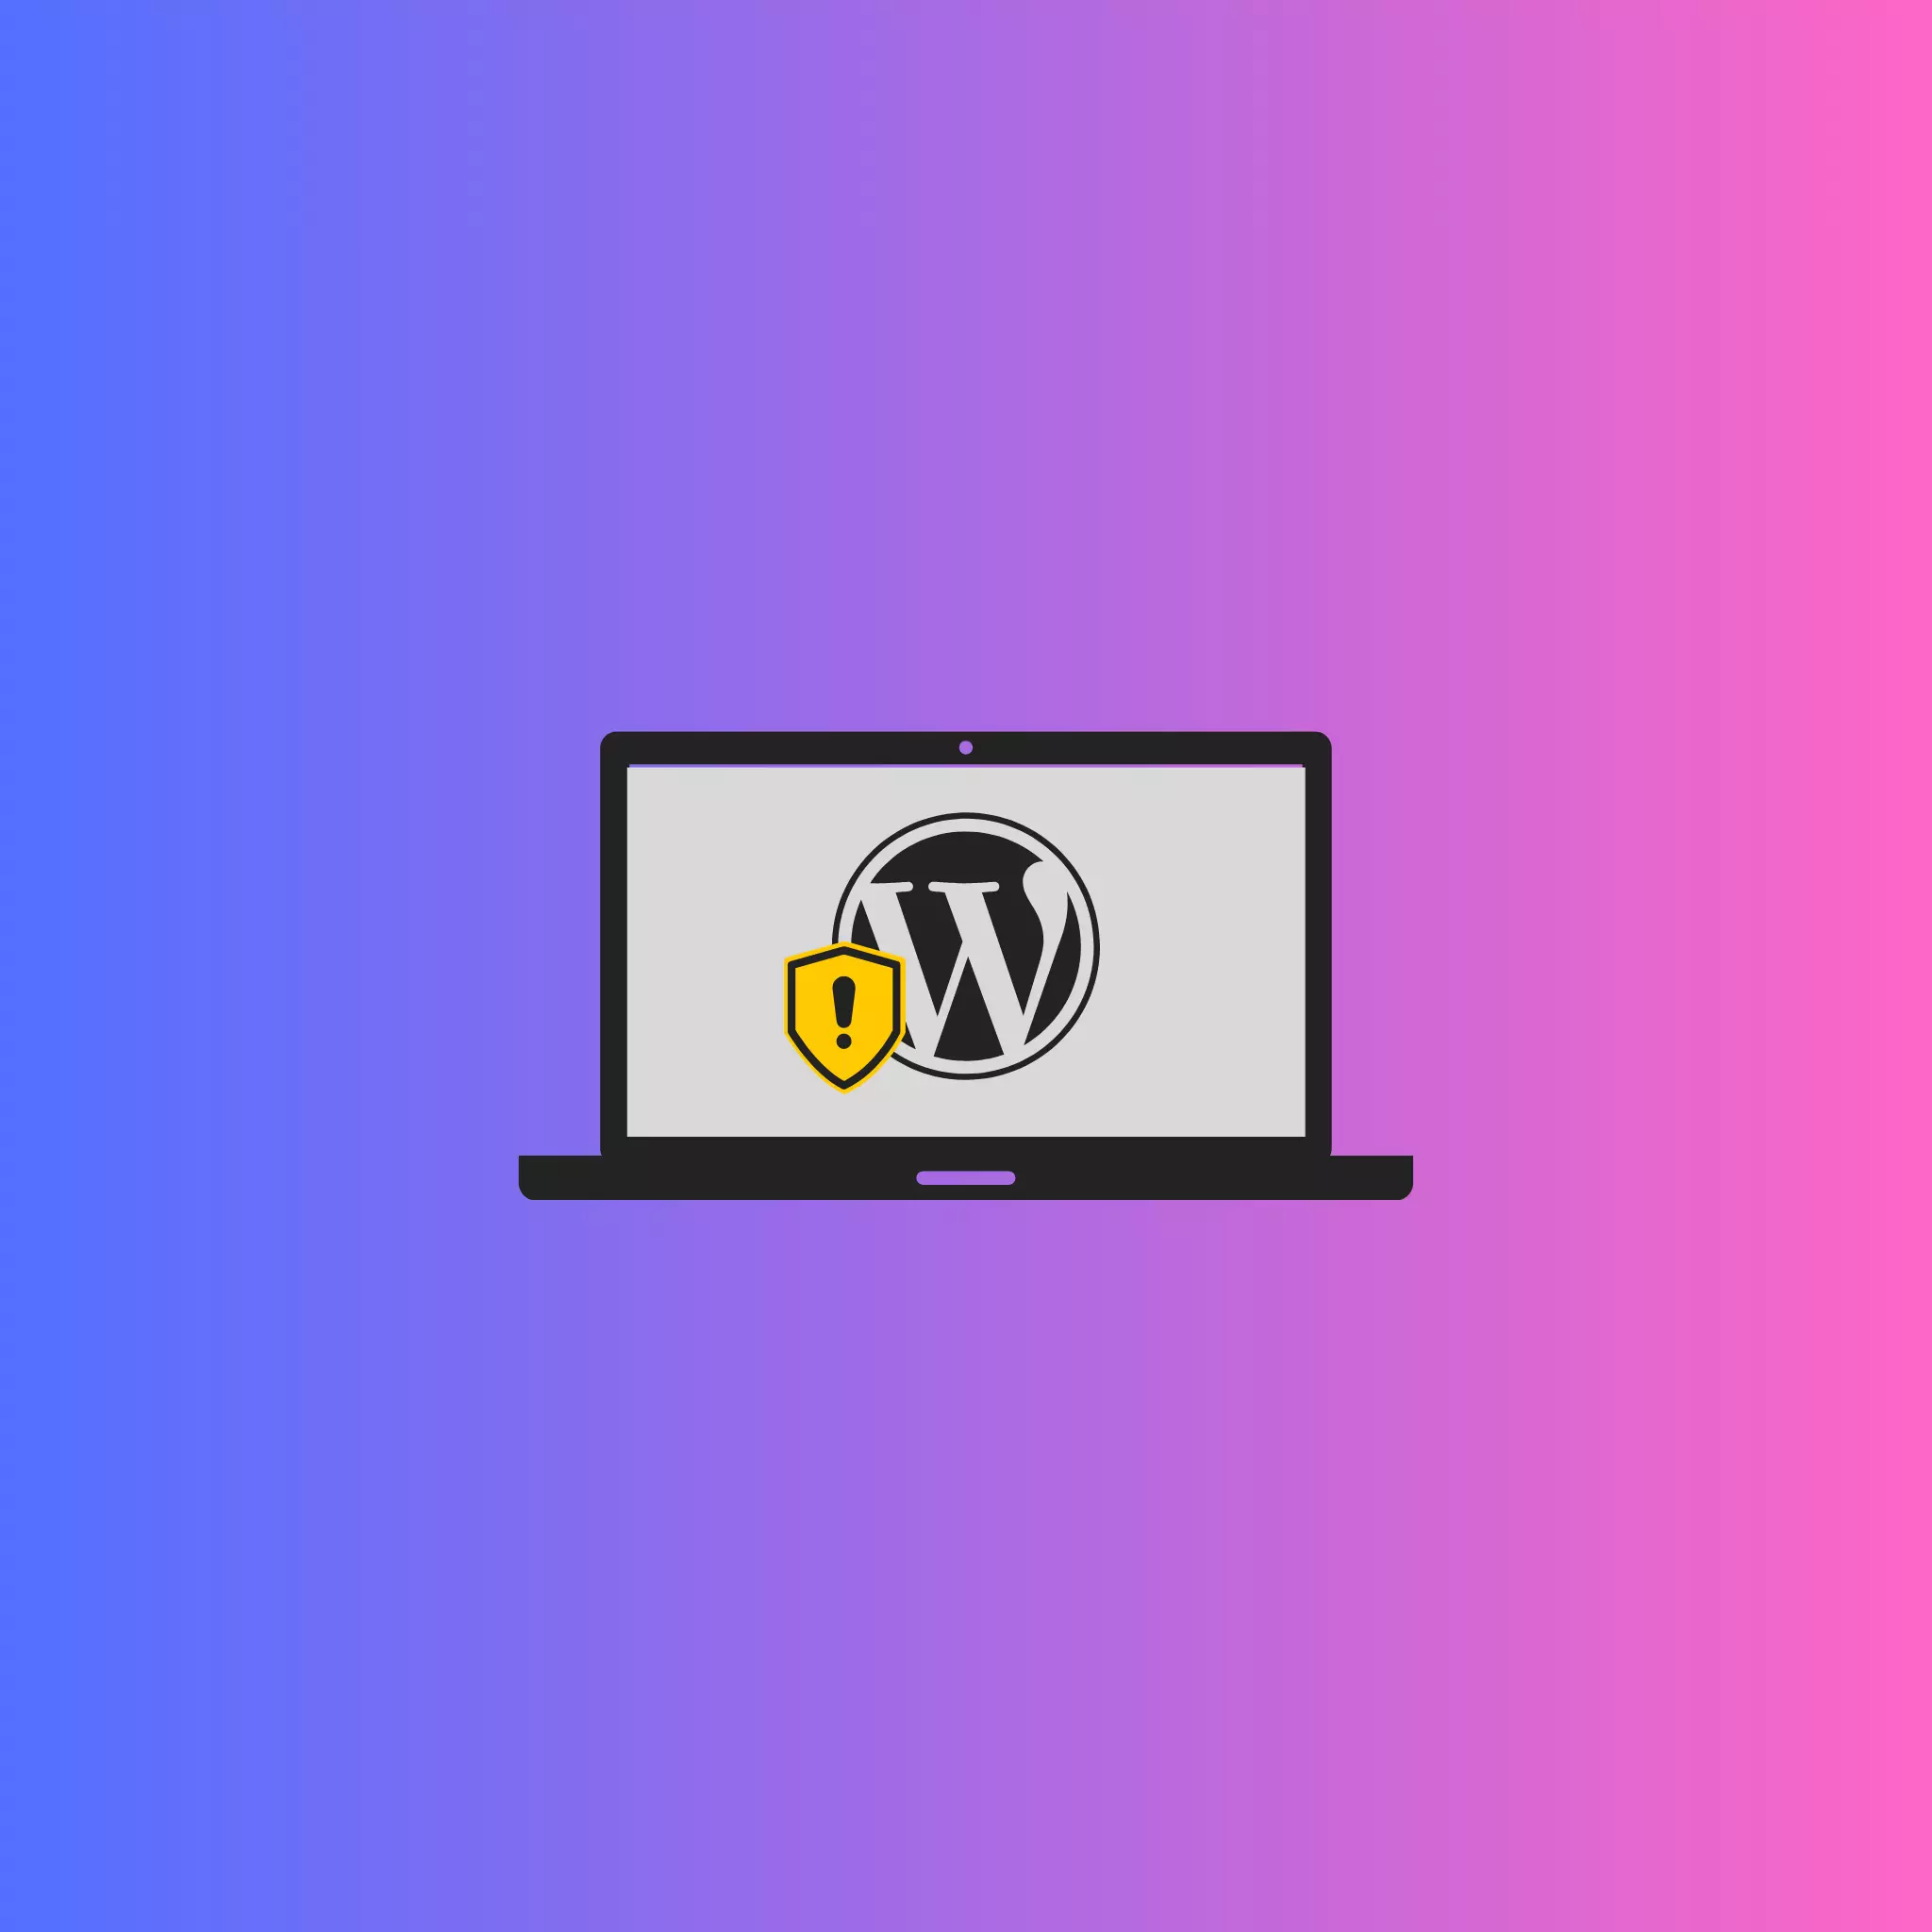 Secure WordPress website illustration featuring a laptop displaying the WordPress logo and security warning icon - Tips to avoid common WordPress security mistakes